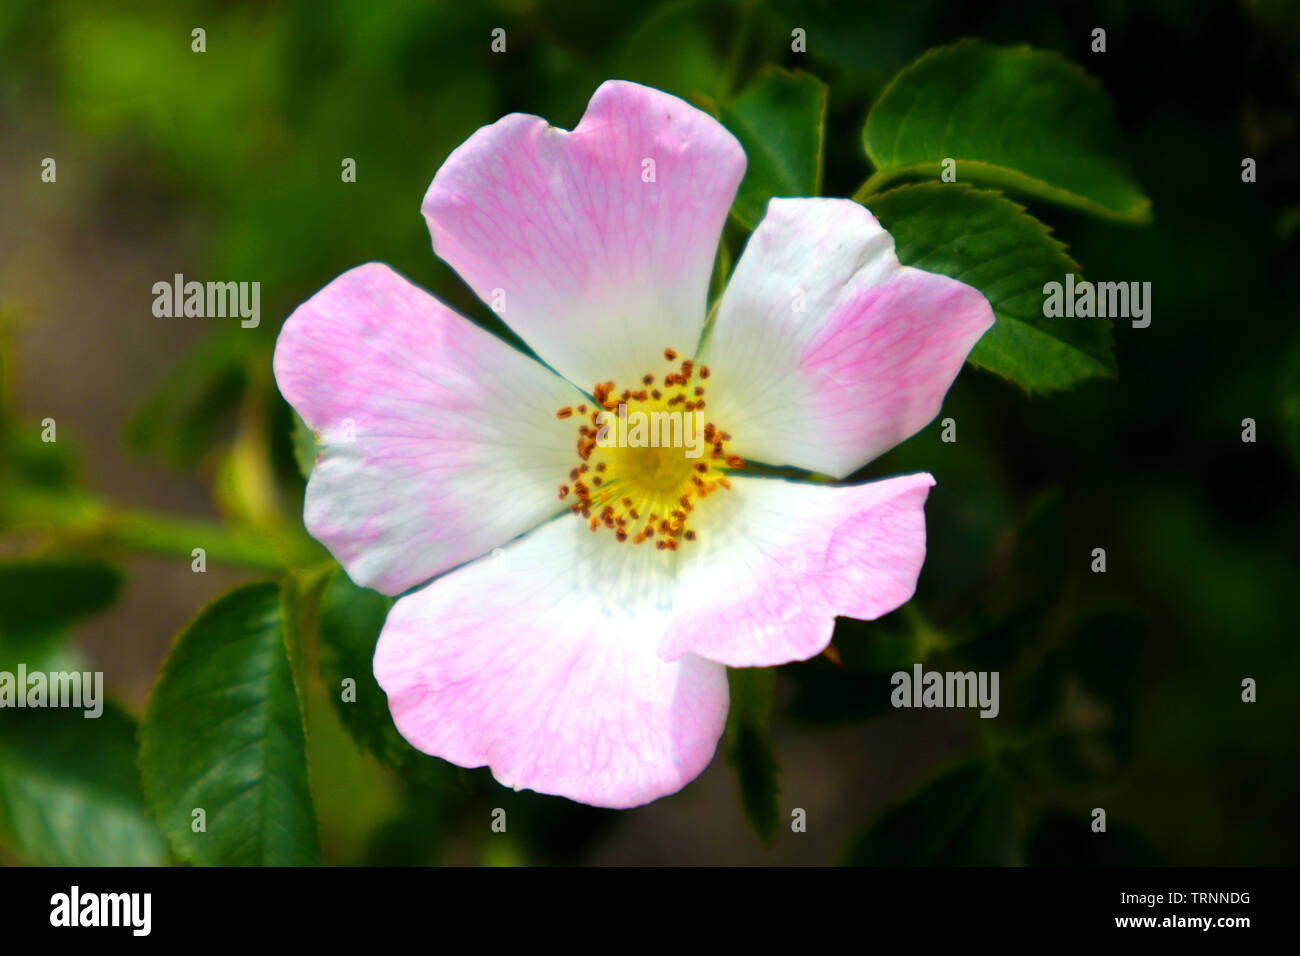 beautiful and fresh flower pink rose Stock Photo